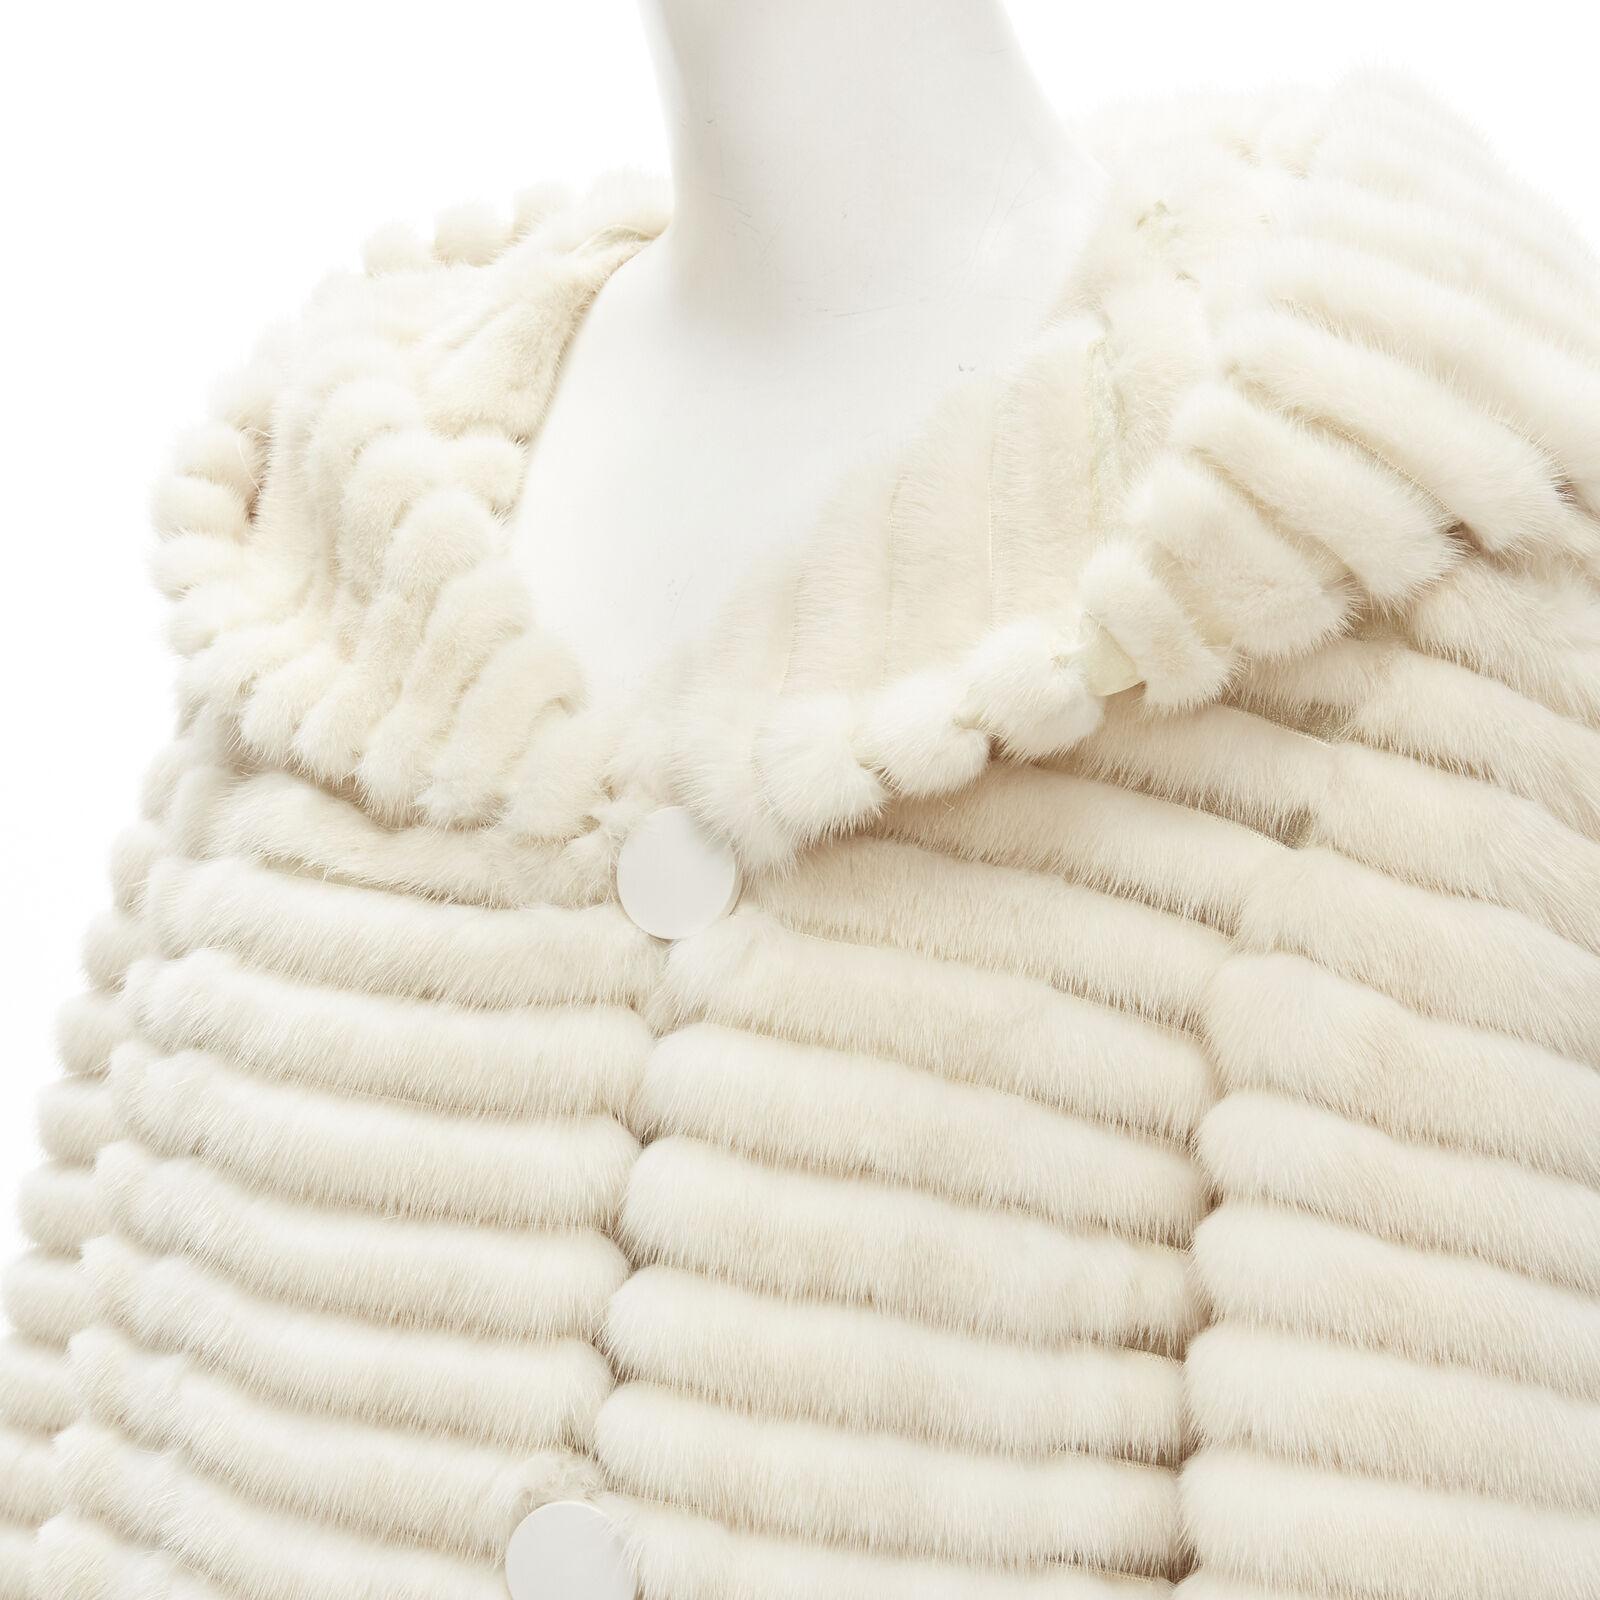 MARCO VANOLI cream tulle fur stripes buttoned asymmetric hooded jacket IT40 S
Reference: KNLM/A00067
Brand: Marco Vanoli
Material: Fur, Tulle
Color: Ecru
Pattern: Striped
Closure: Button
Lining: Silk
Made in: Italy

CONDITION:
Condition: Excellent,